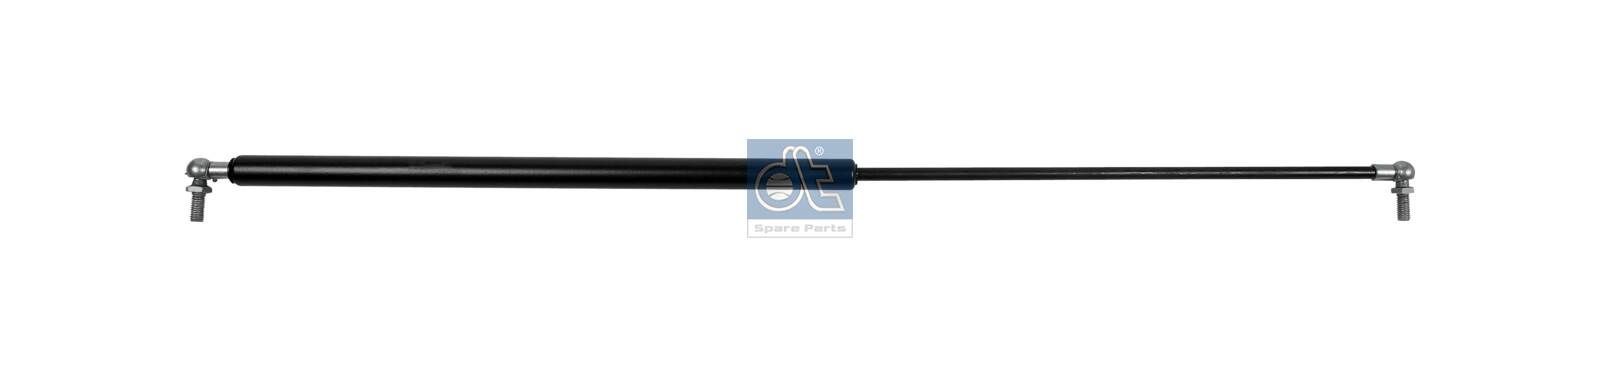 104956 DT Spare Parts 350N, 704 mm Gas Spring 3.80759 buy